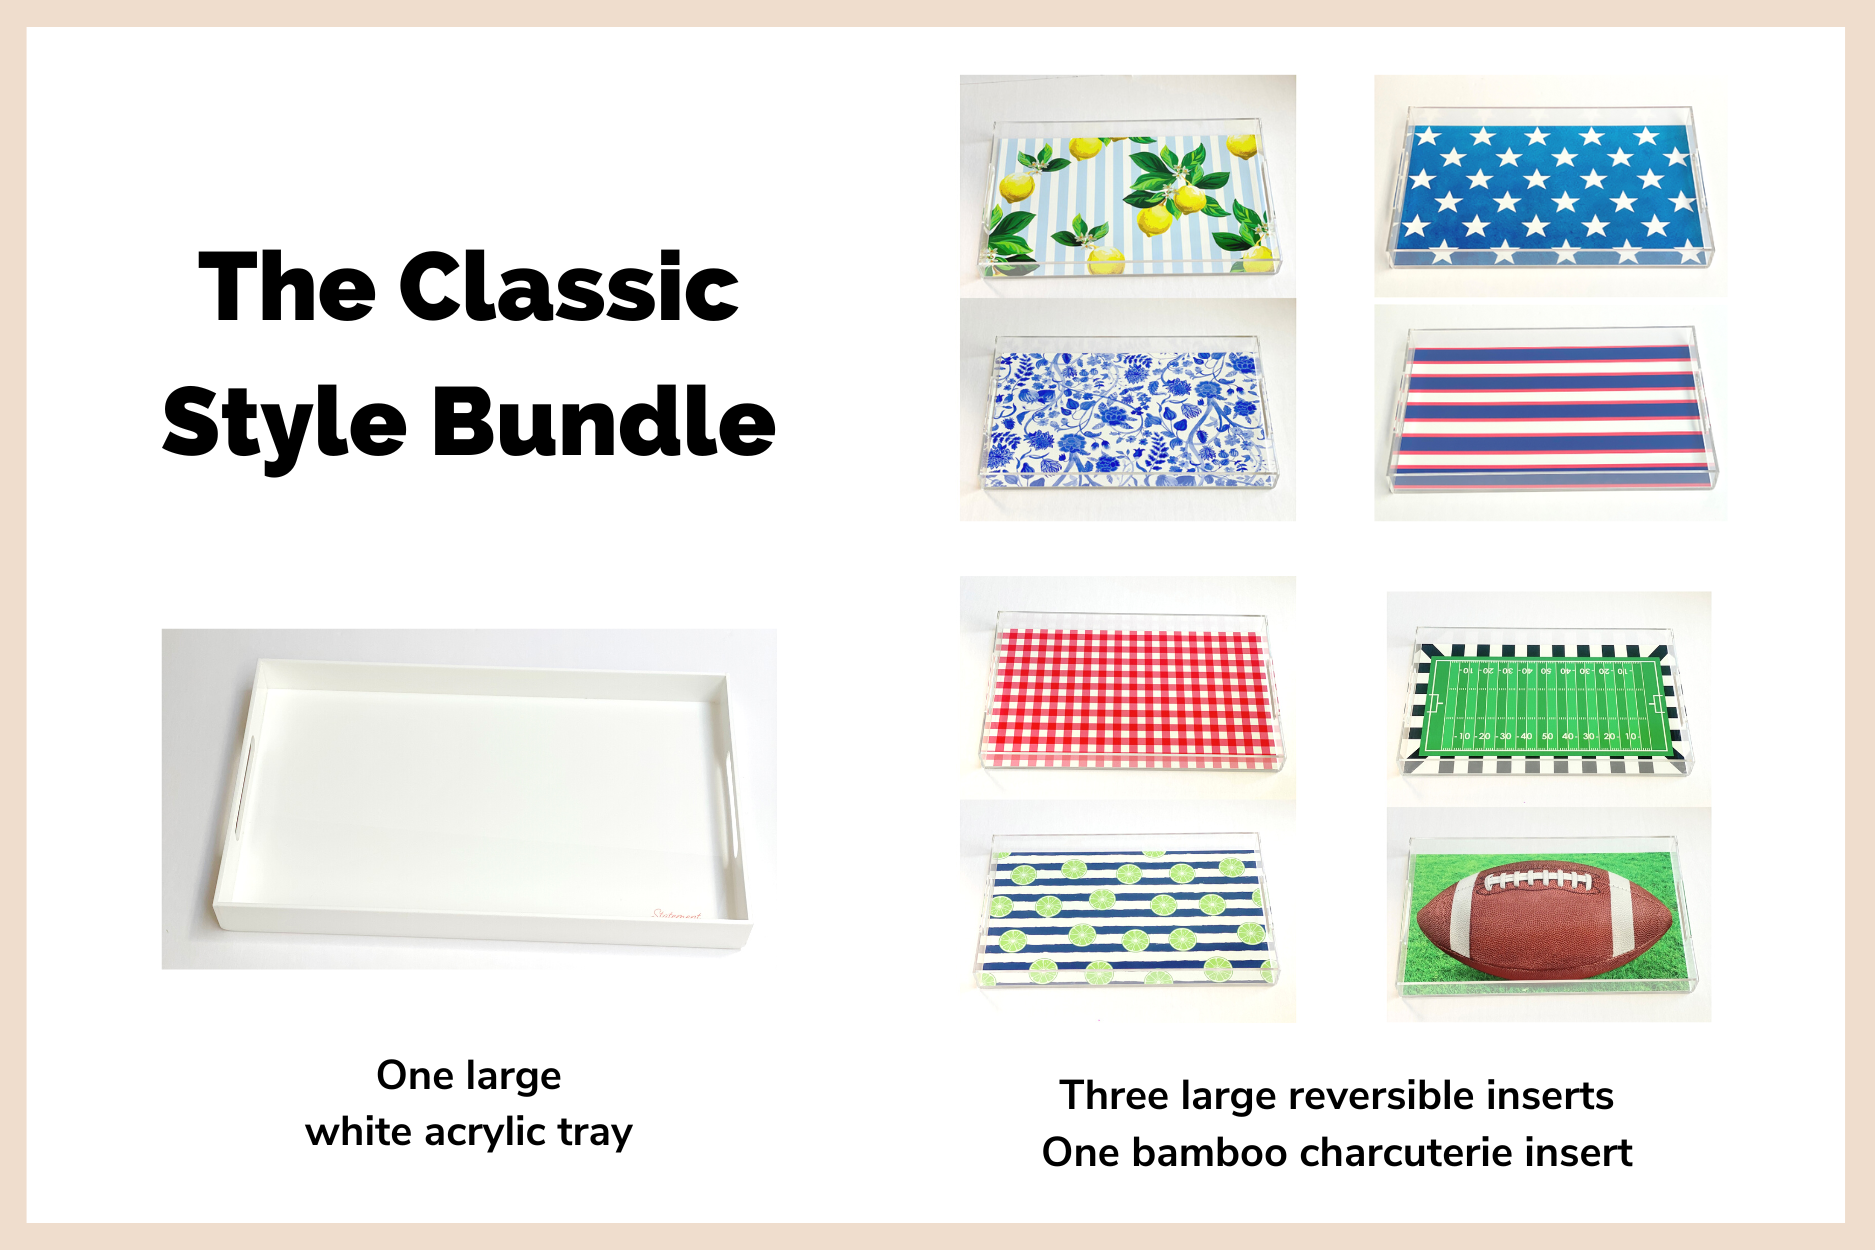 The Classic Style Bundle